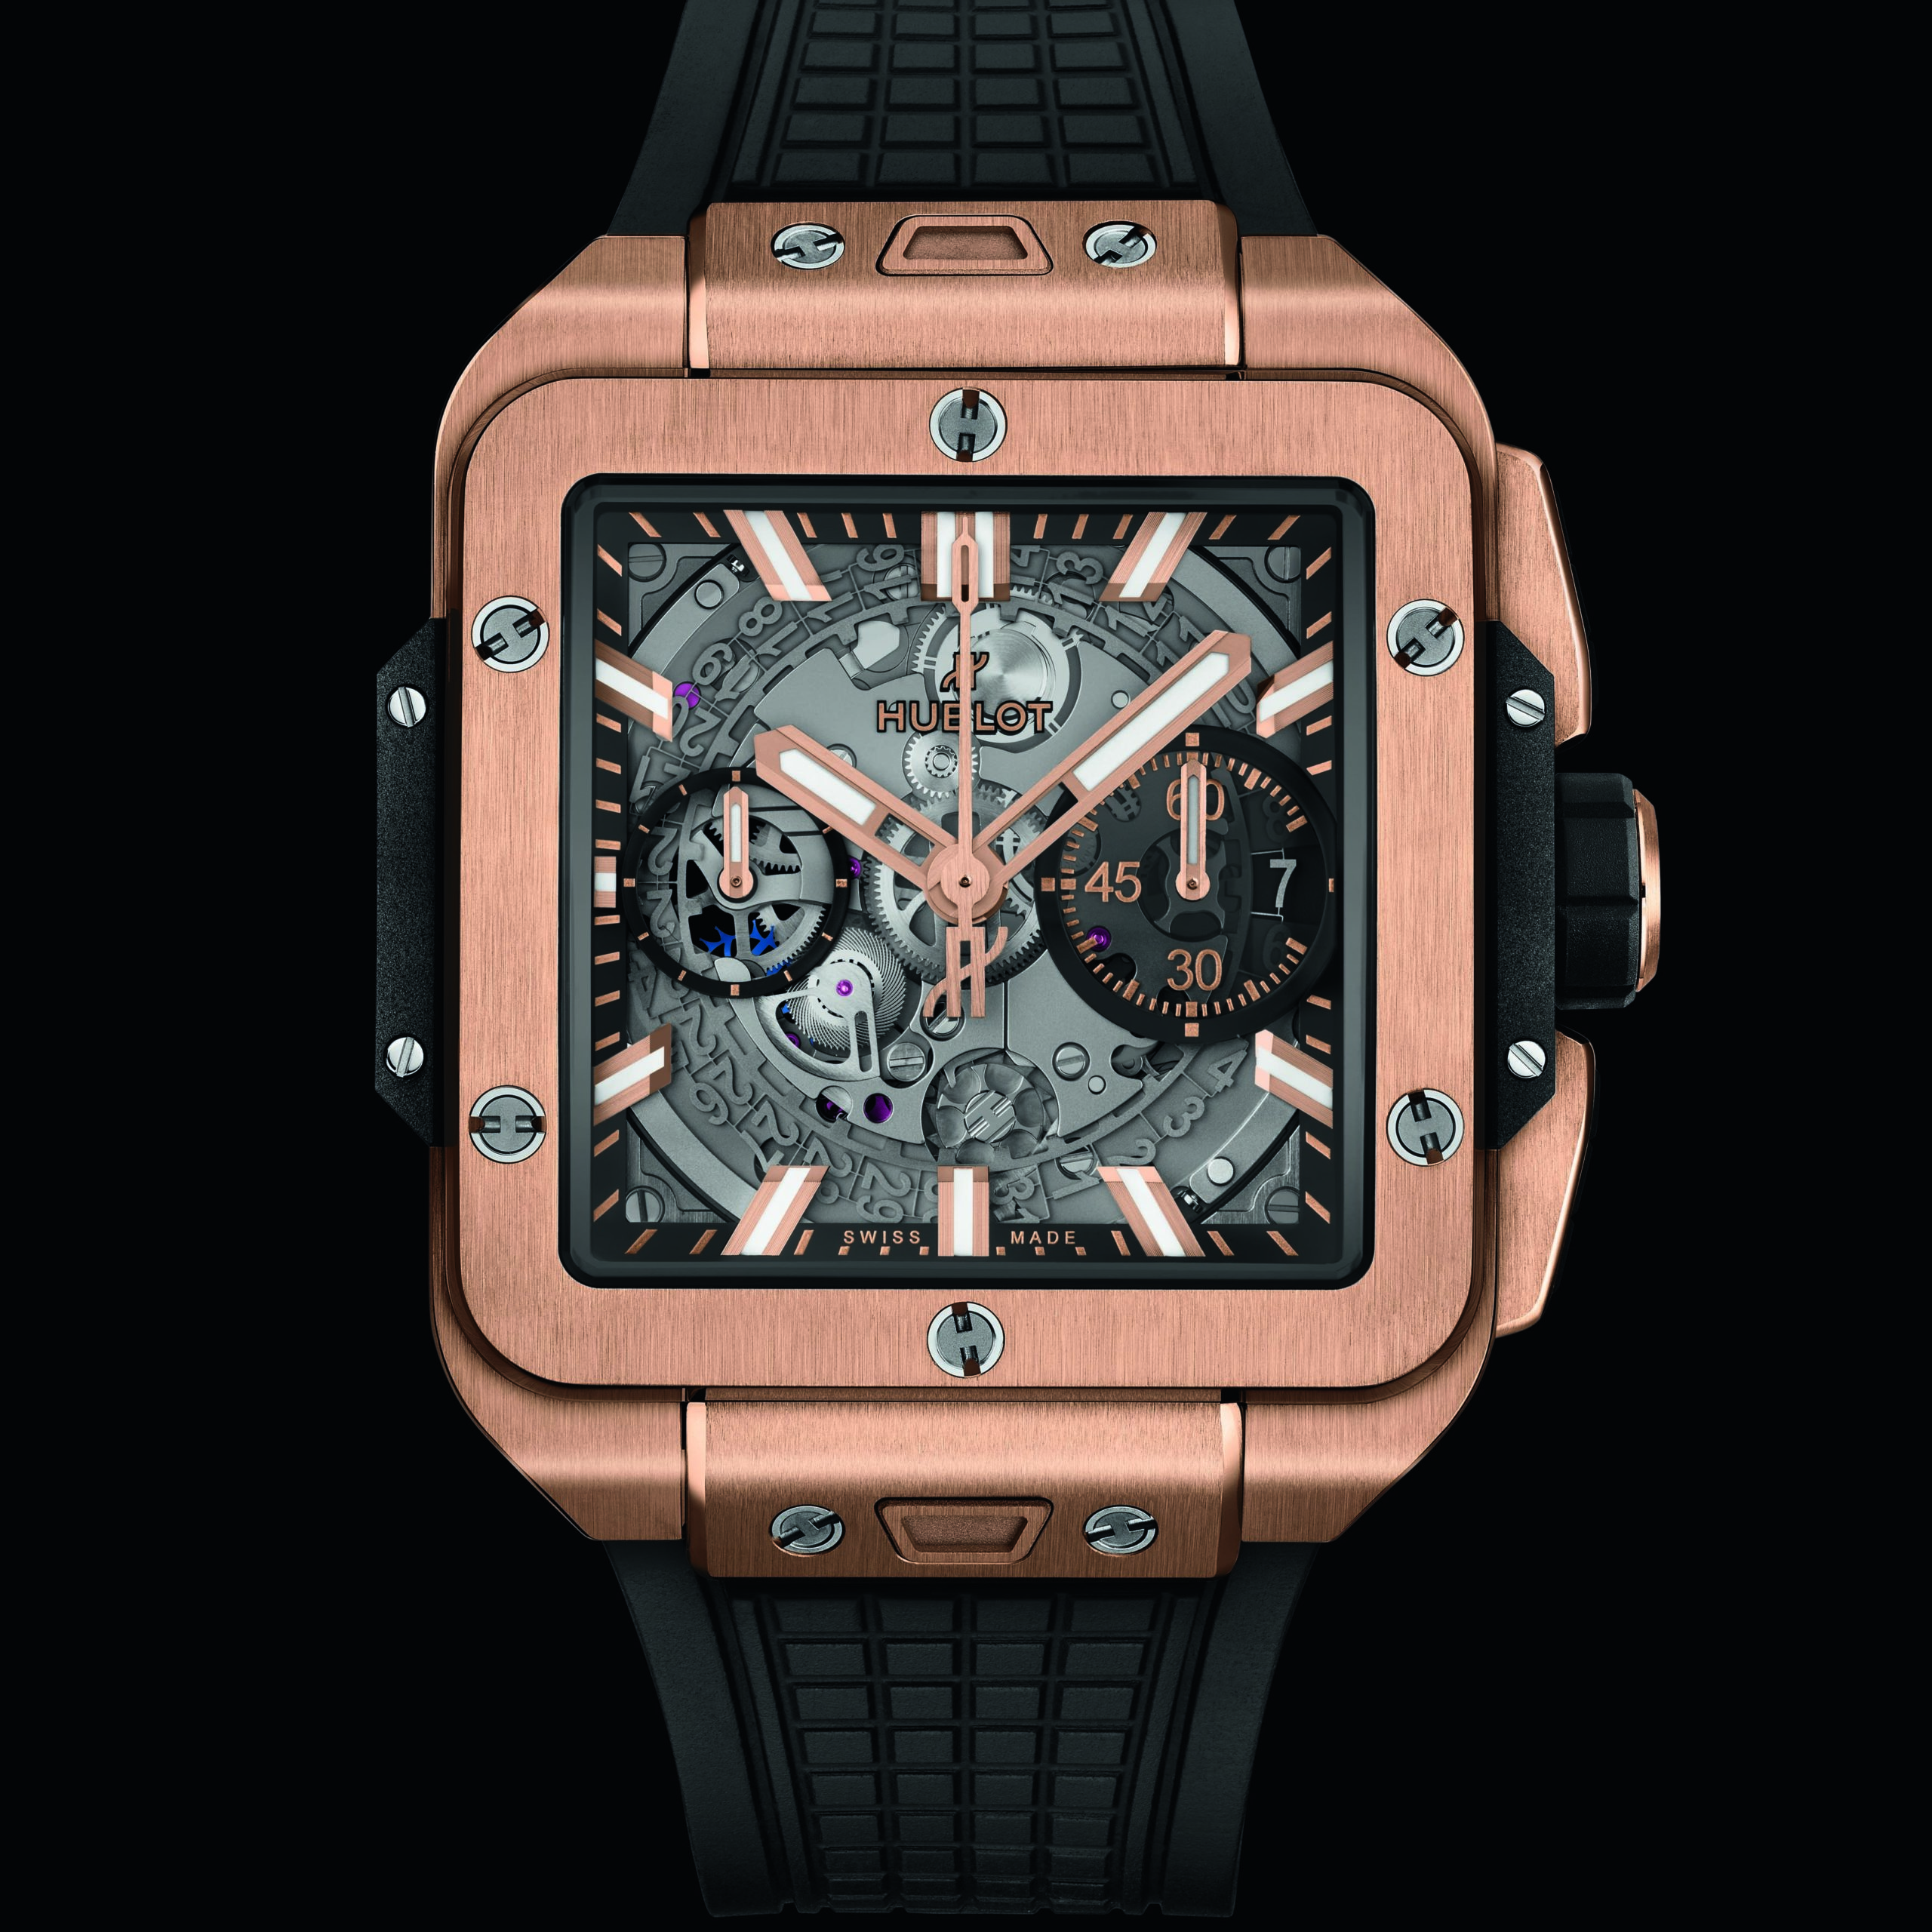 Watches and Wonders 2022: Hublot unveils its first square watch